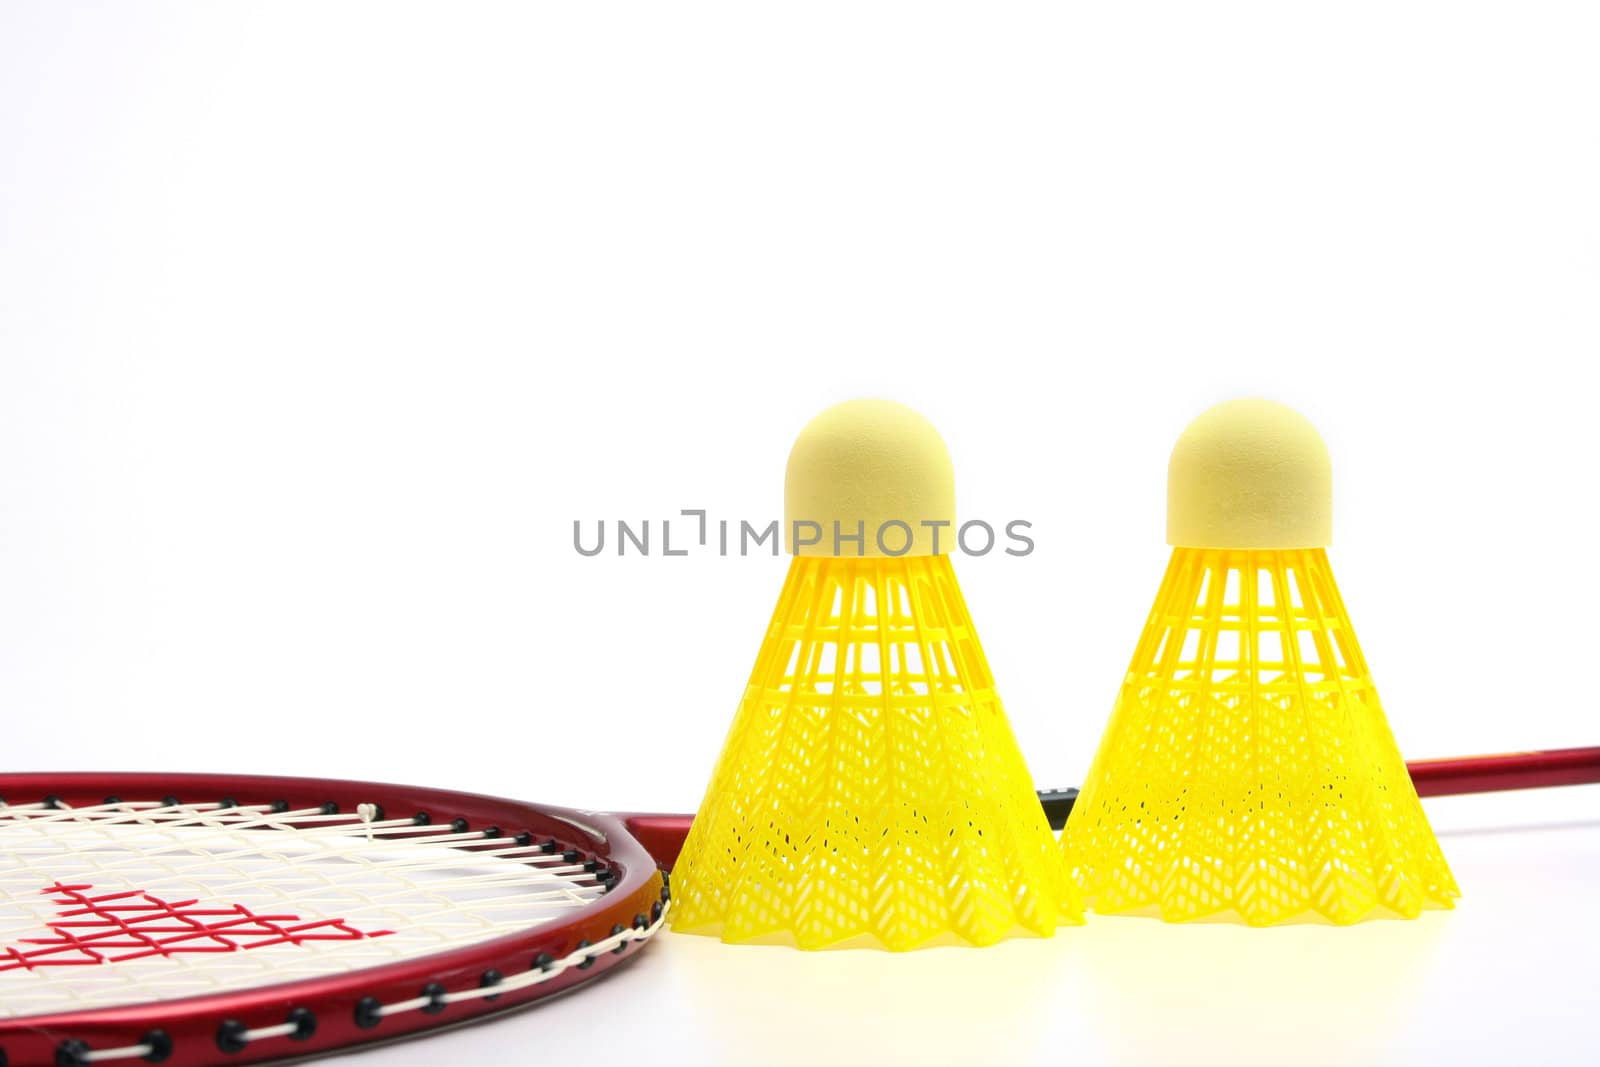 Yellow shuttlecocks for badminton and a racket.